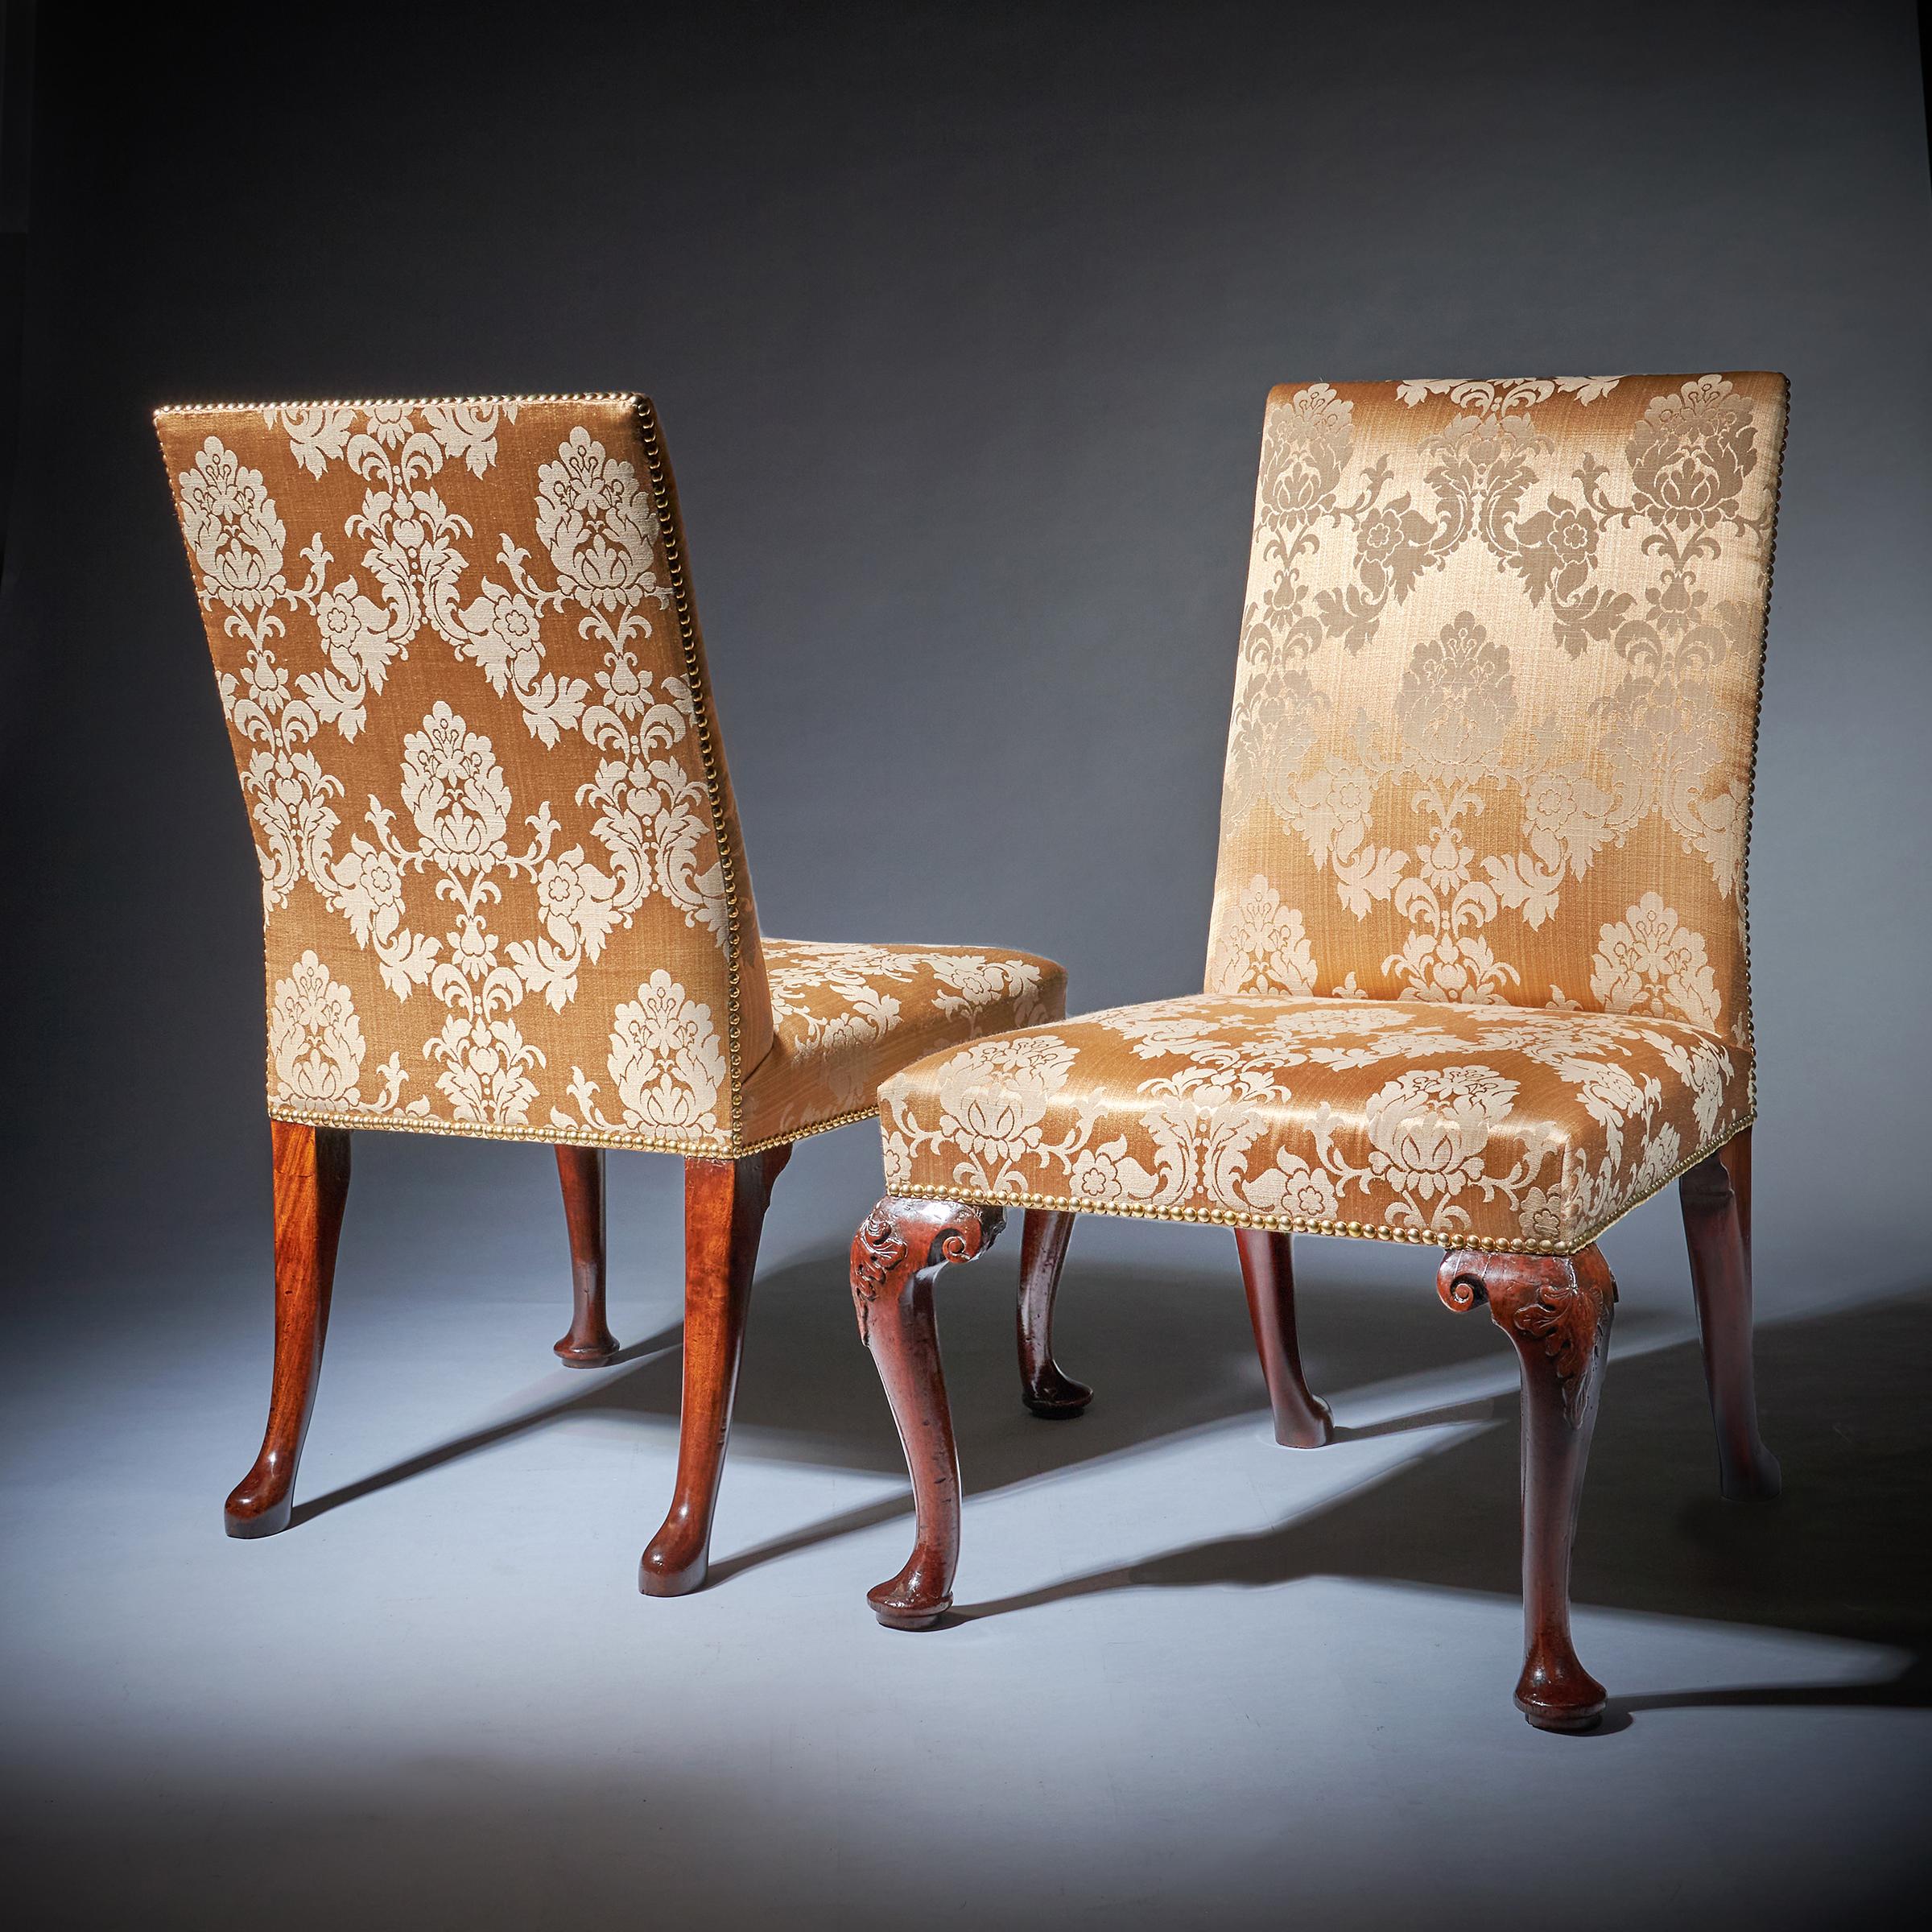 English Pair of 18th C. George II Mahogany High Back Chairs on Carved Cabriole Legs